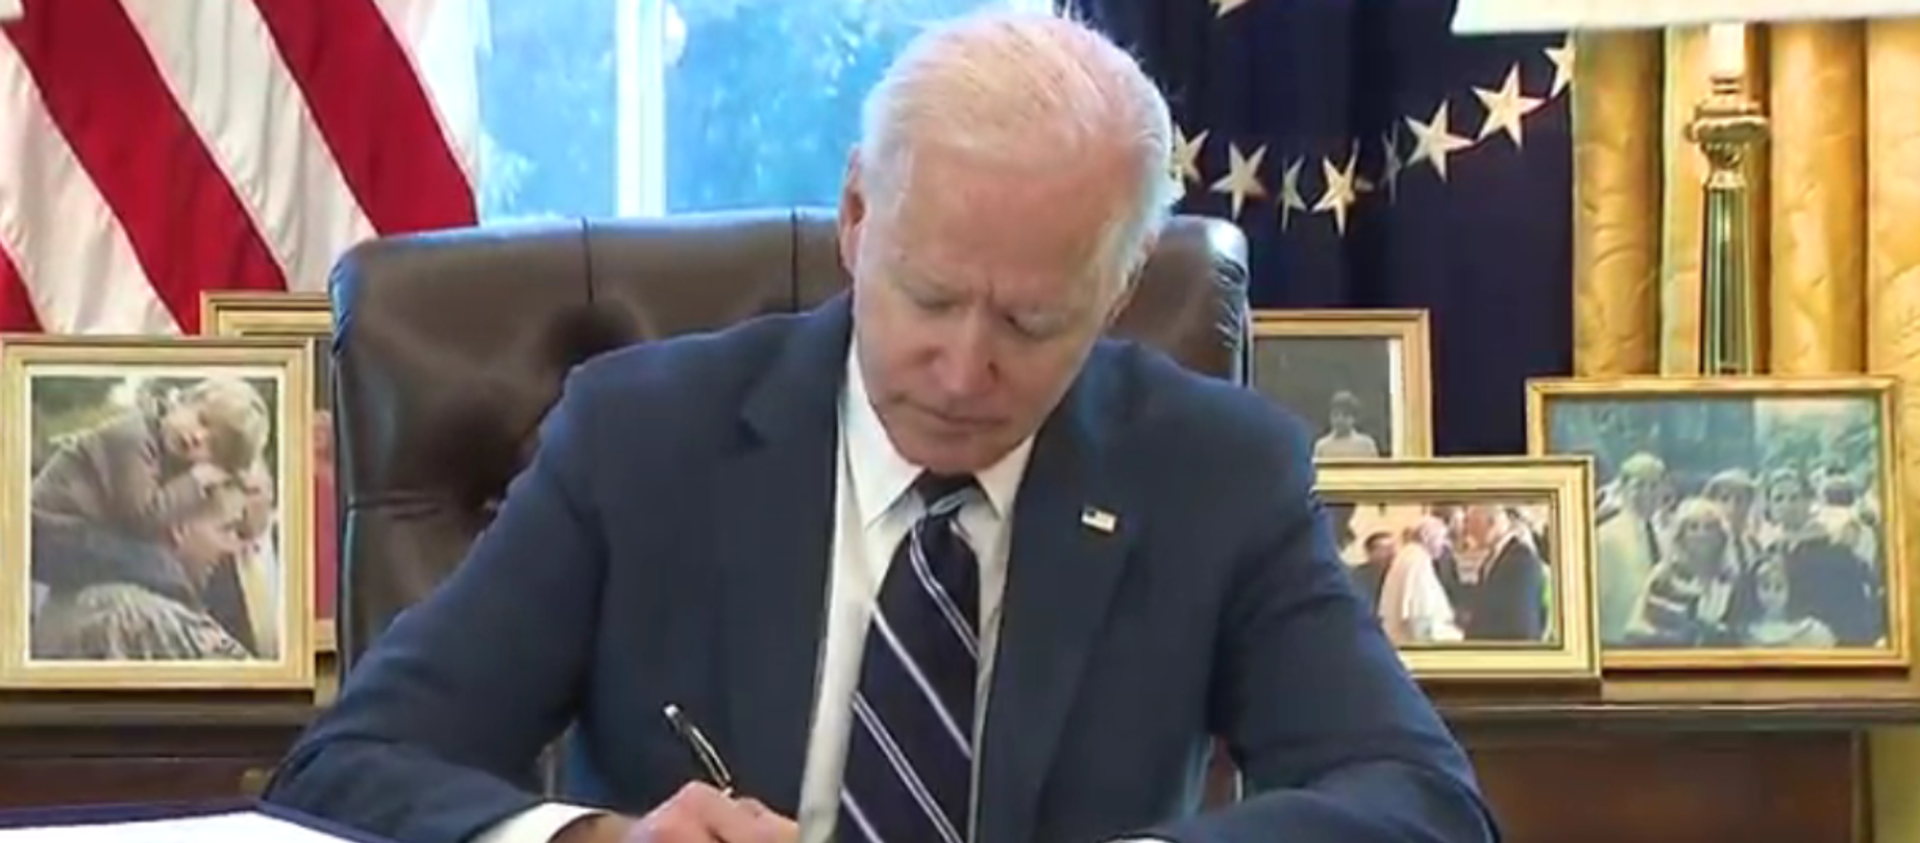 US President Joe Biden signing the American Rescue Plan Act into law in the Oval Office on March 11, 2021. - Sputnik International, 1920